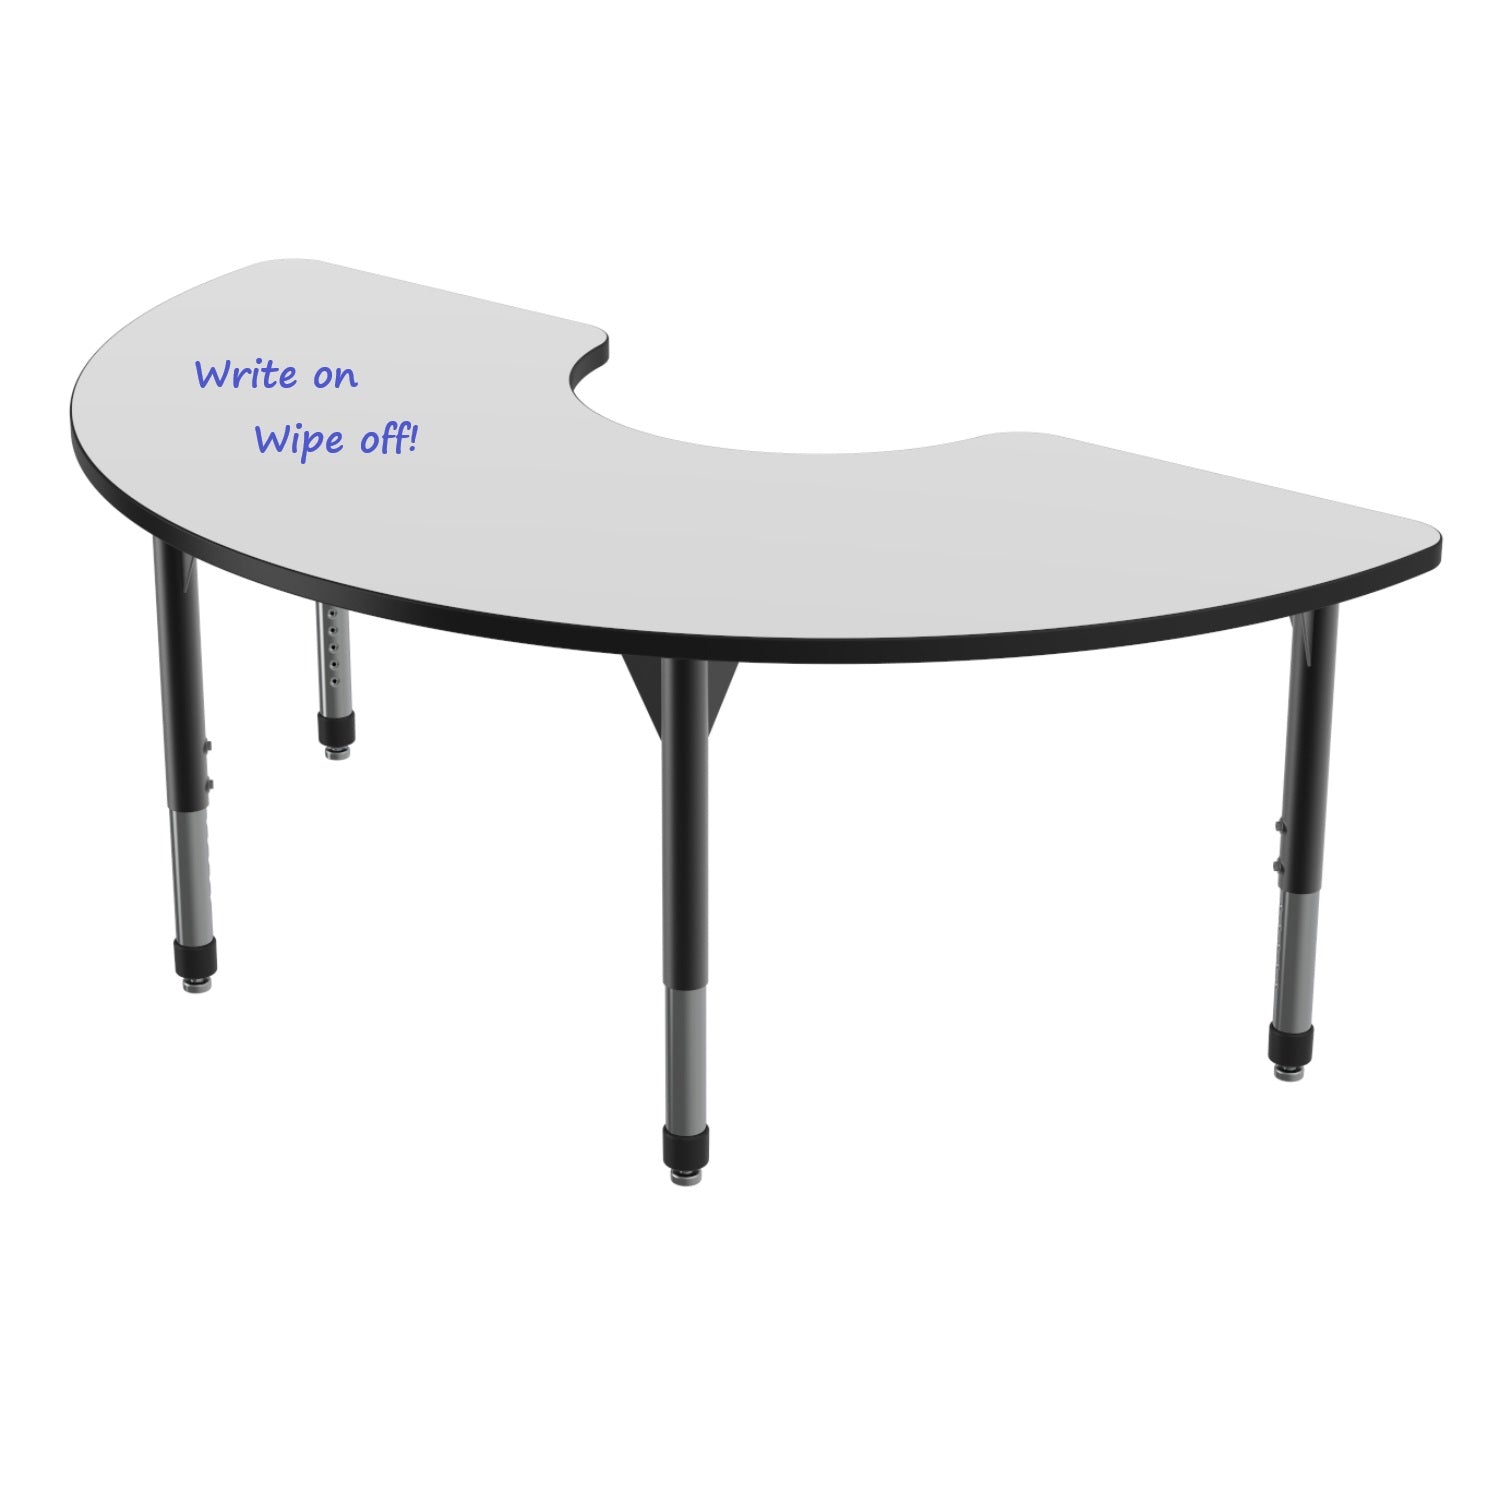 Premier White Dry Erase Sitting Height Collaborative Classroom Table, 36" x 72" Half Moon